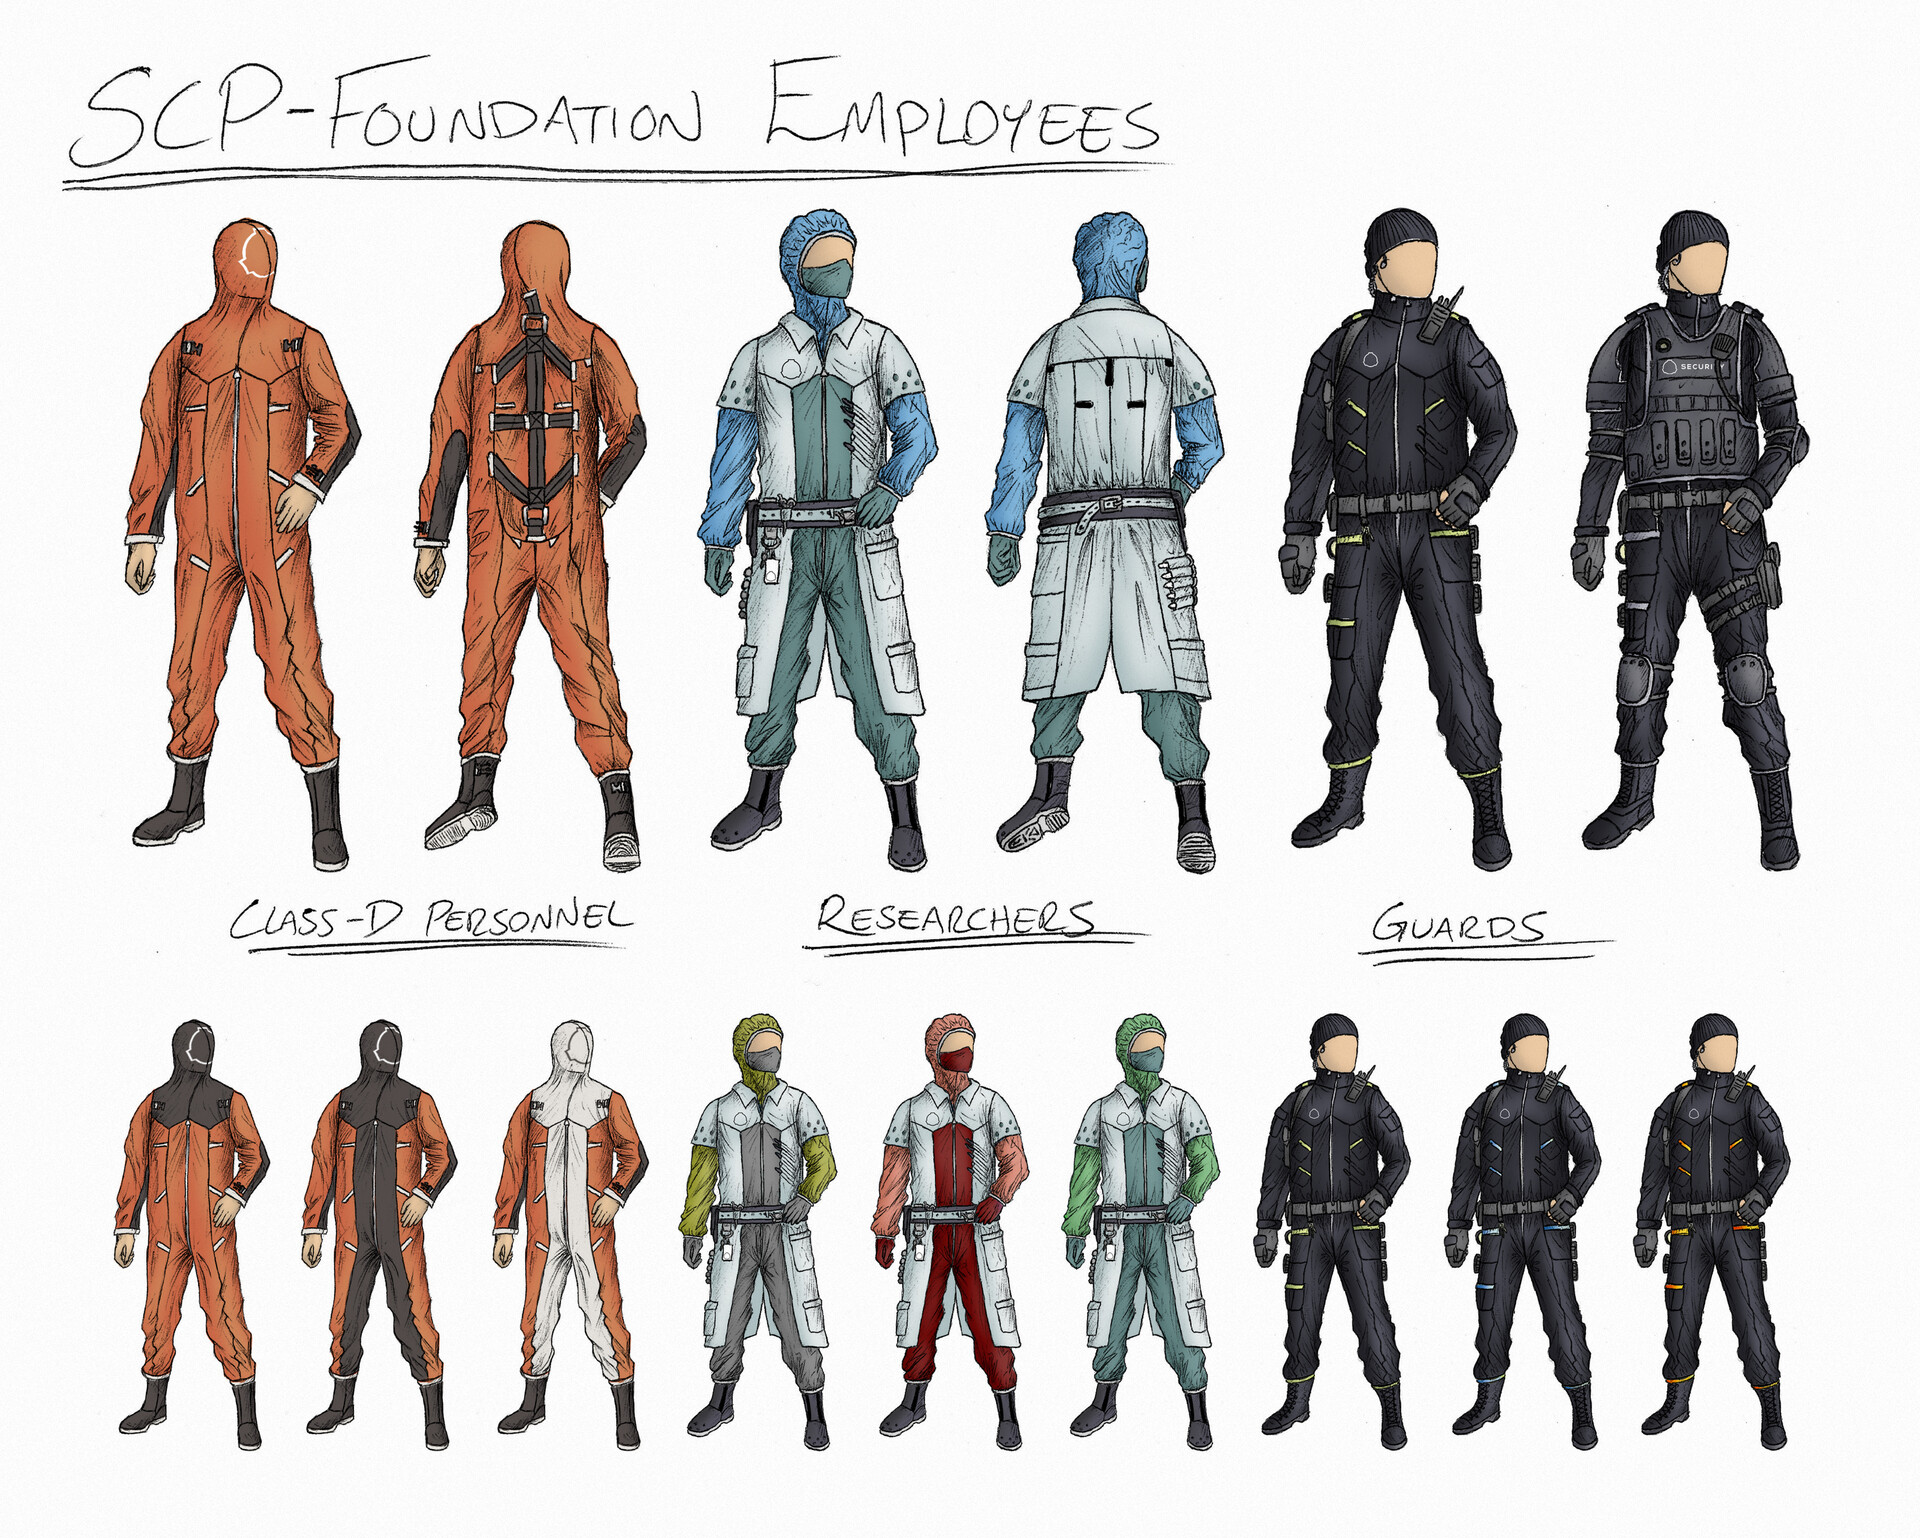 Personnel And Character Dossier - SCP Foundation